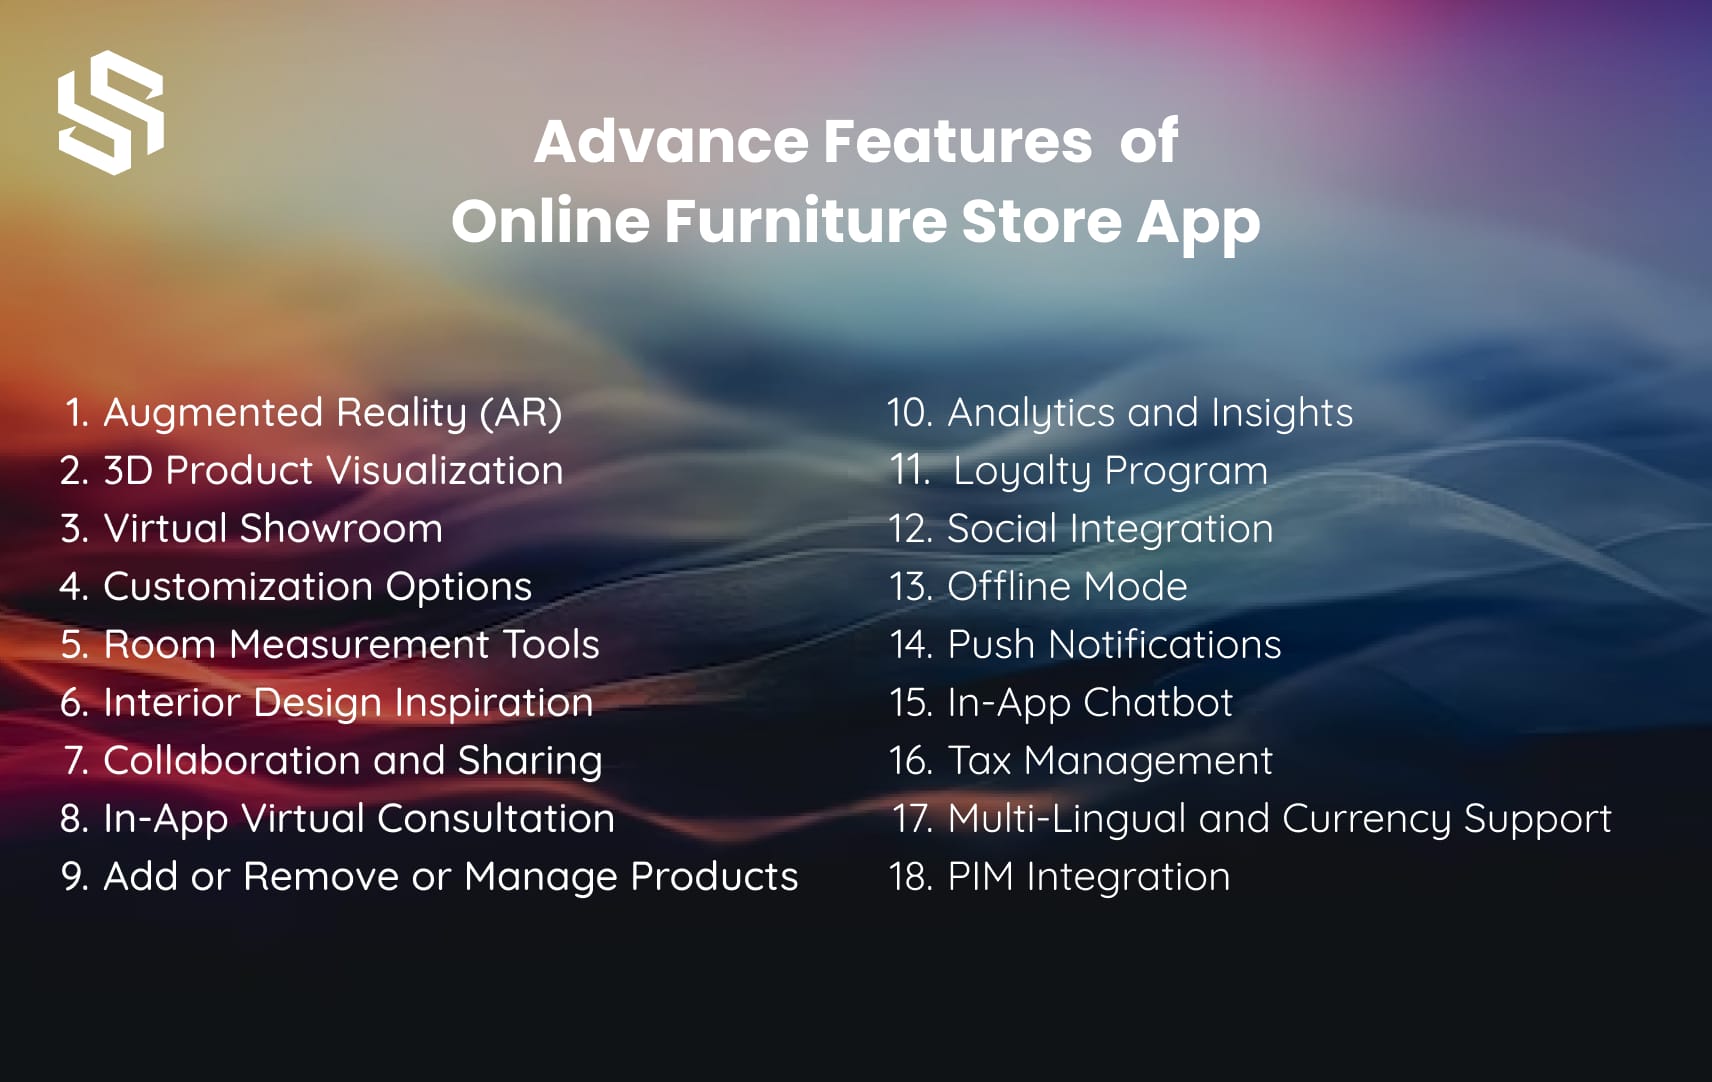 Advanced Features of Online Furniture Store App